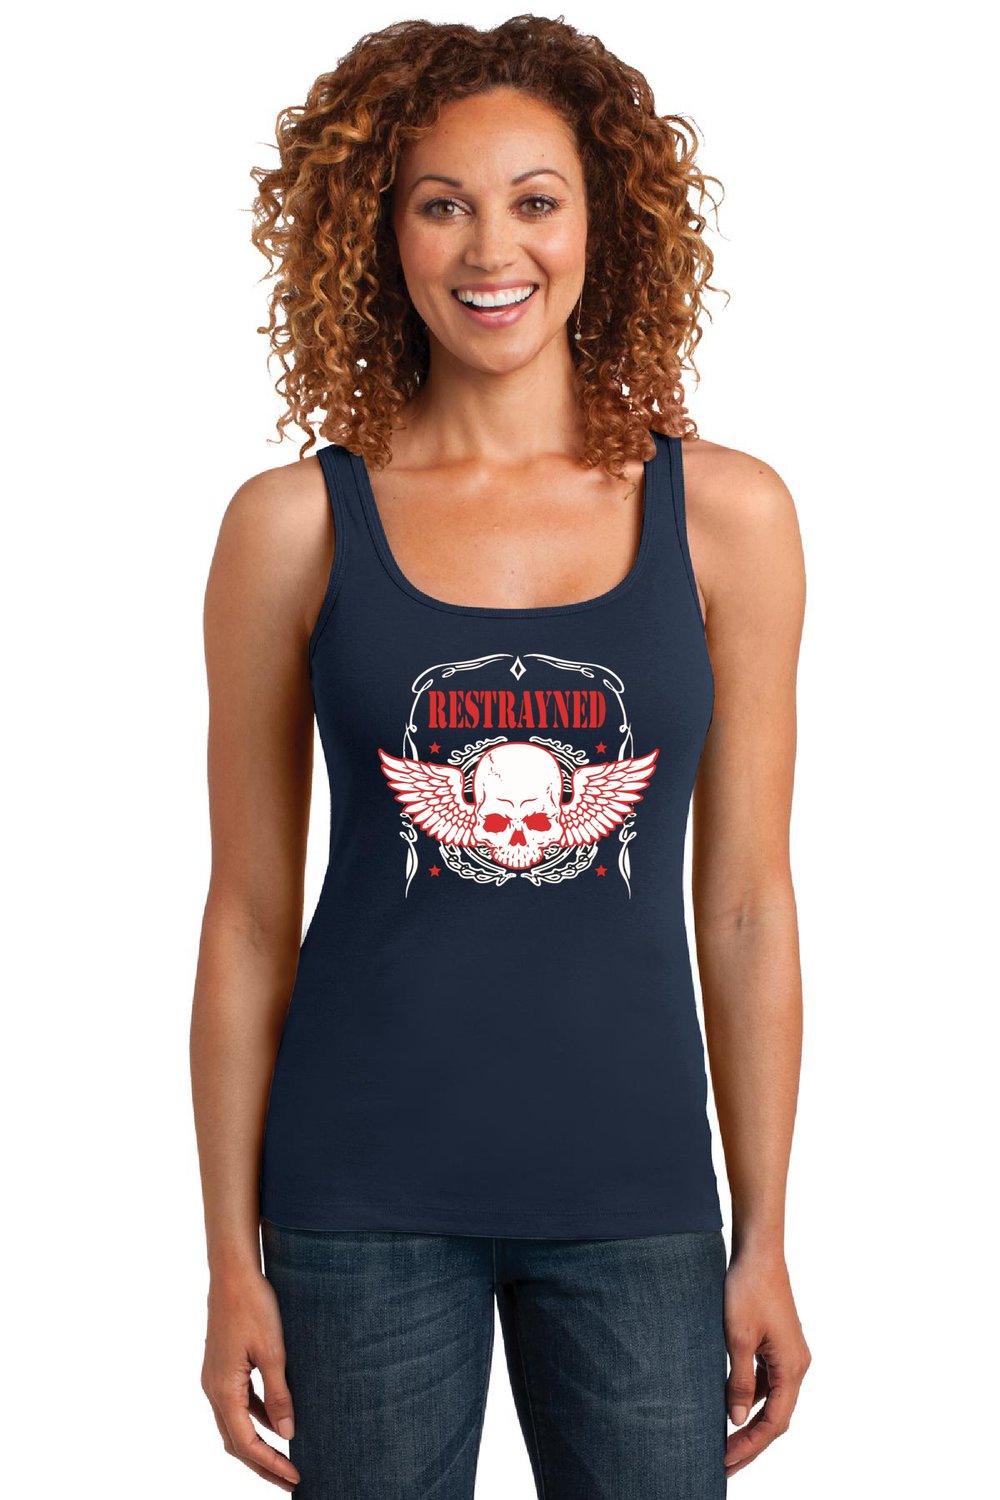 Women's Tank Top - Restrayned Skull and Wings